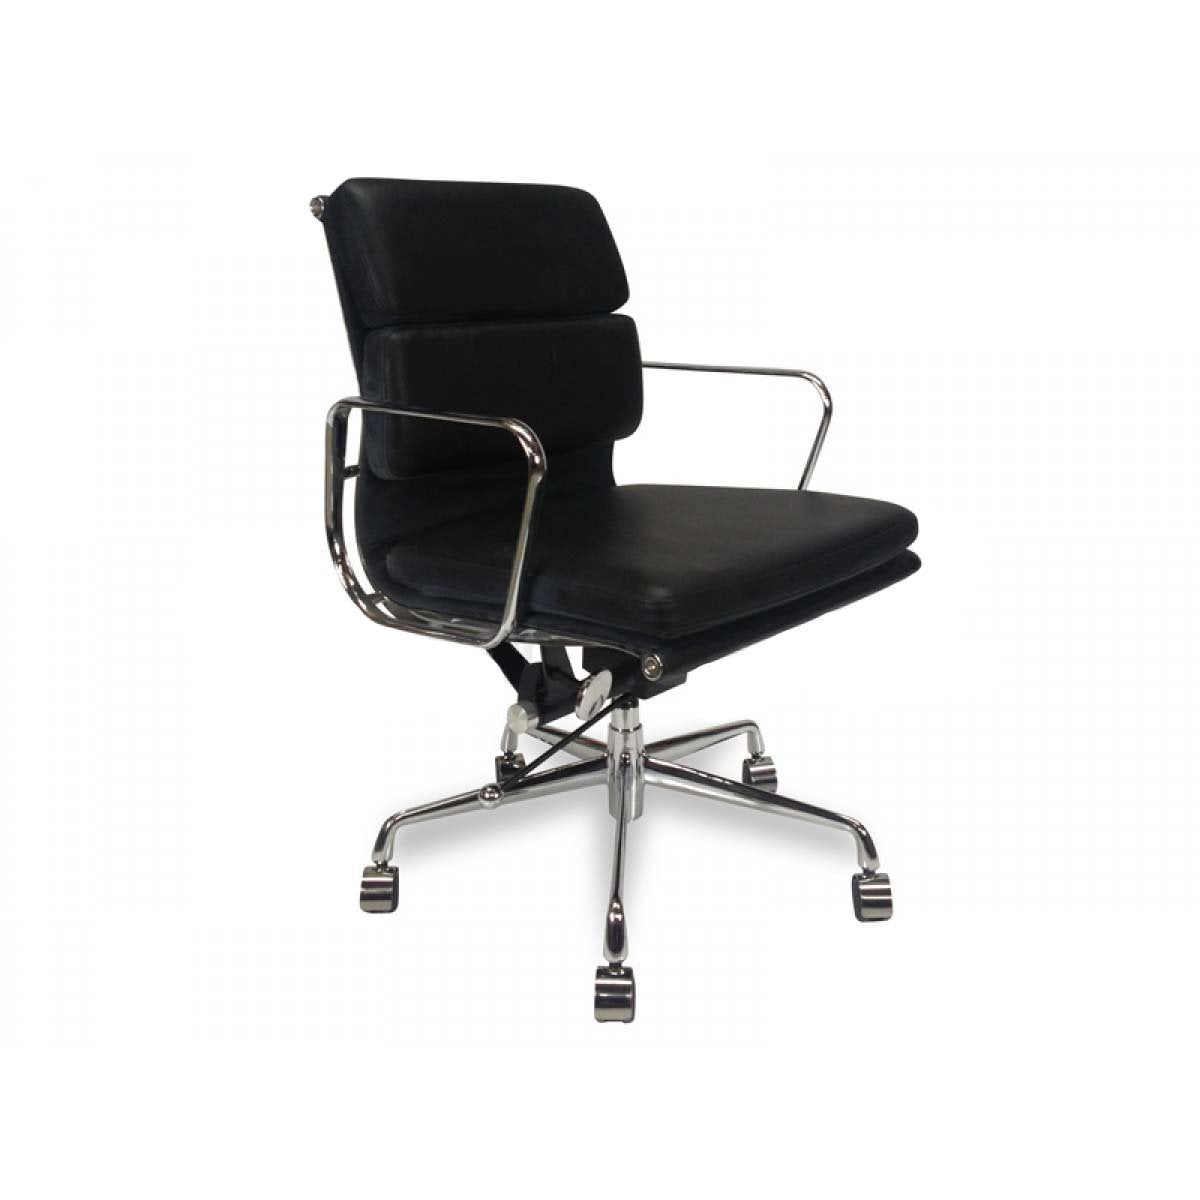 Natalie Low Back Office Chair - Black Leather